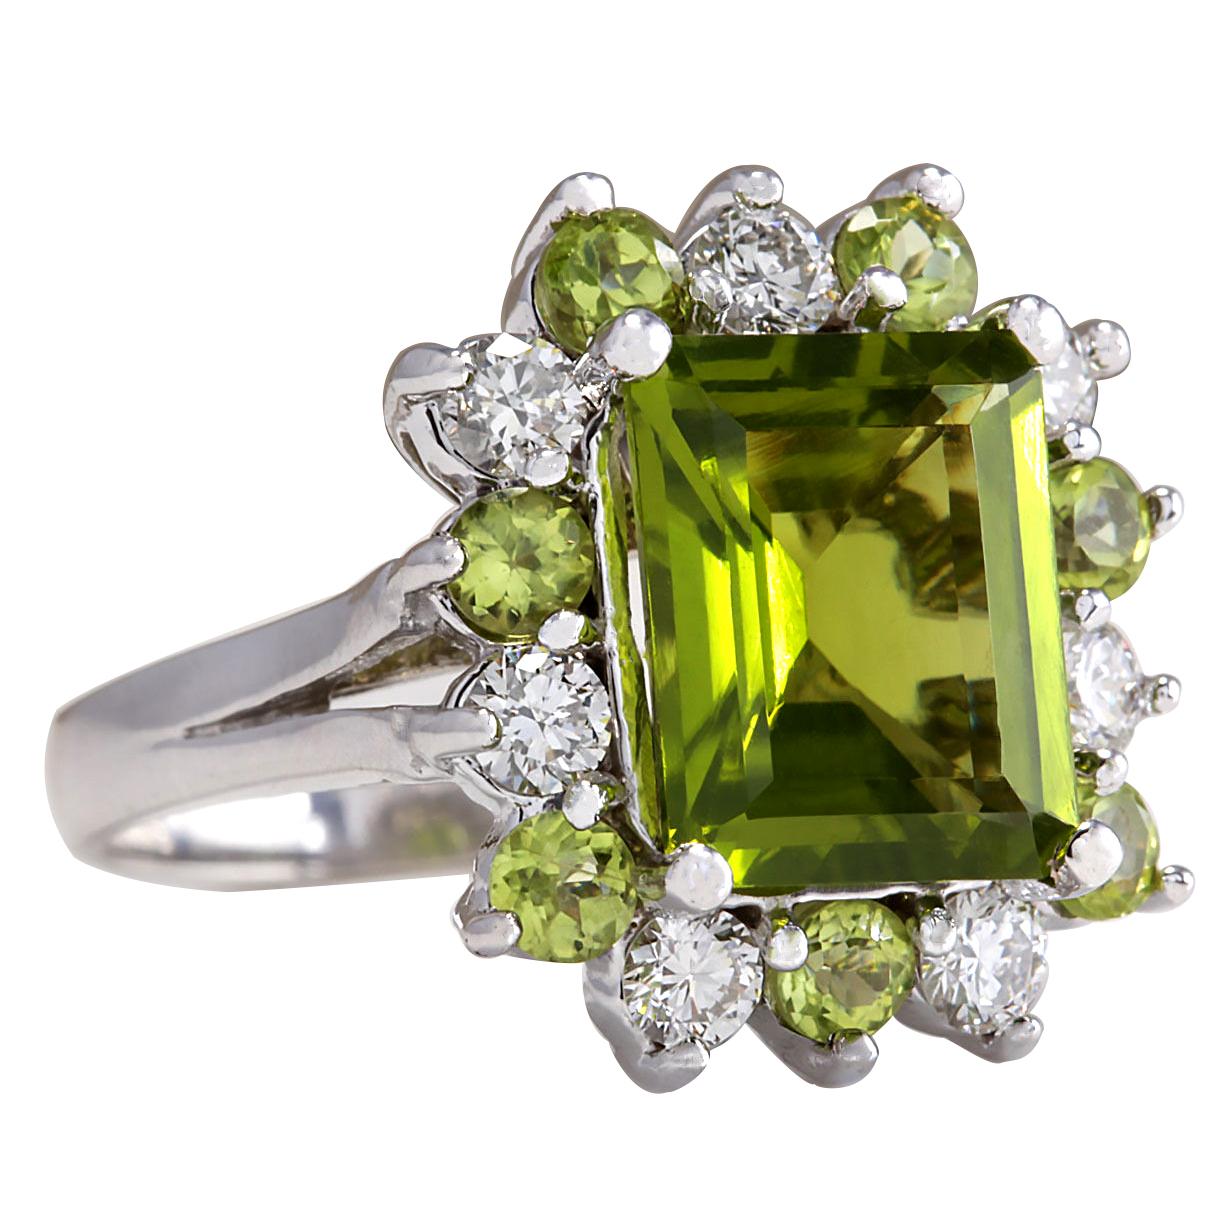 Indulge in the natural beauty of our 4.97 Carat Natural Peridot 14 Karat White Gold Diamond Ring. Crafted with exquisite attention to detail, this ring is a true testament to luxury and sophistication.

The centerpiece of this stunning ring is a